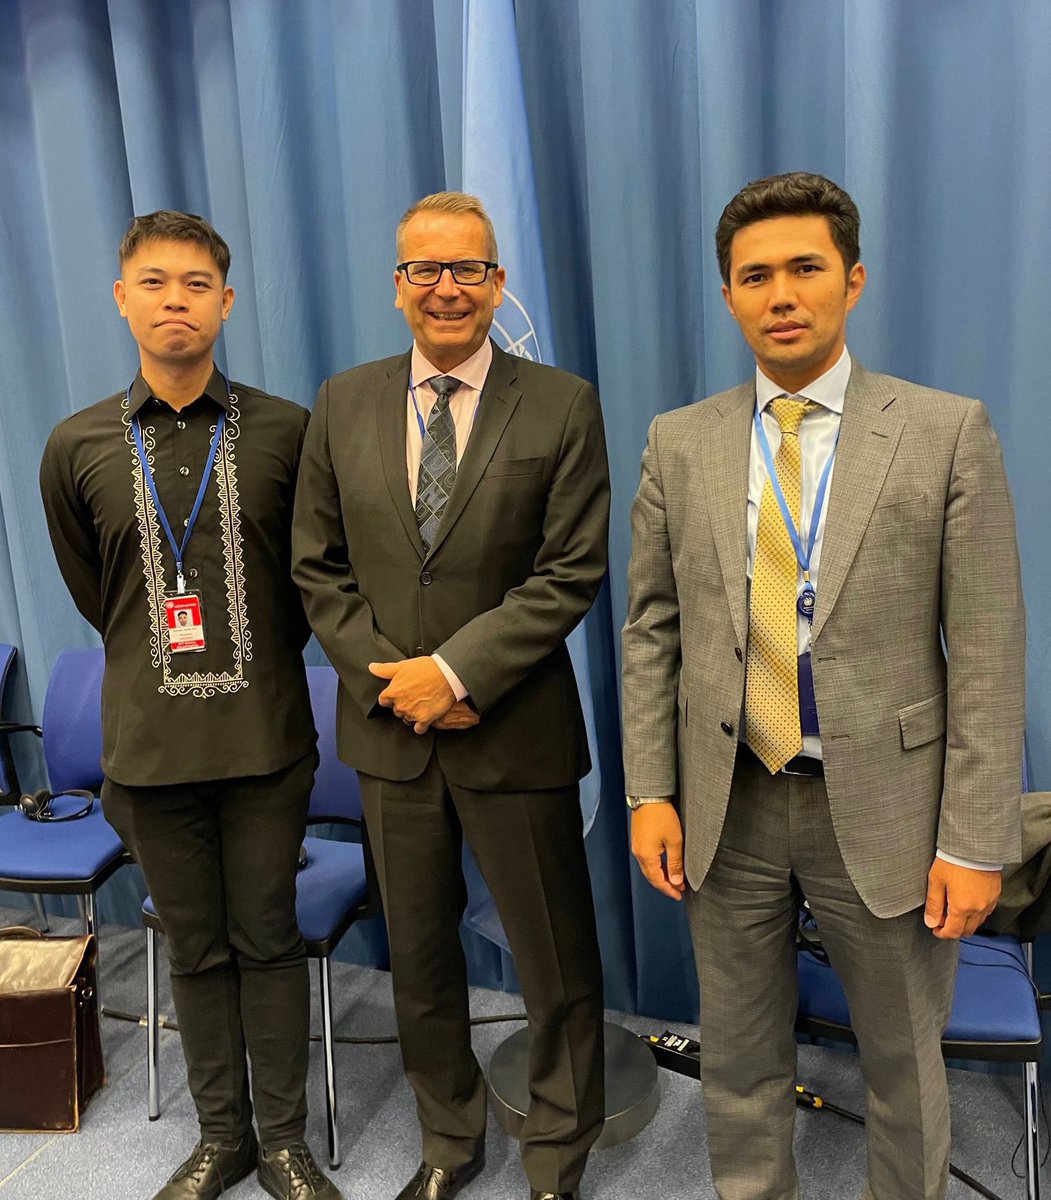 A new Working Group meets in Vienna this week to improve #NPT processes, led by 🇫🇮 Amb. @JarmoViinanen as Chair, seen here with his vice chairs: 🇰🇿 Minister-Counselor Arsen Omarov, representing Eastern European Group; and Mr. JJ Domingo of 🇵🇭 representing non-aligned states.